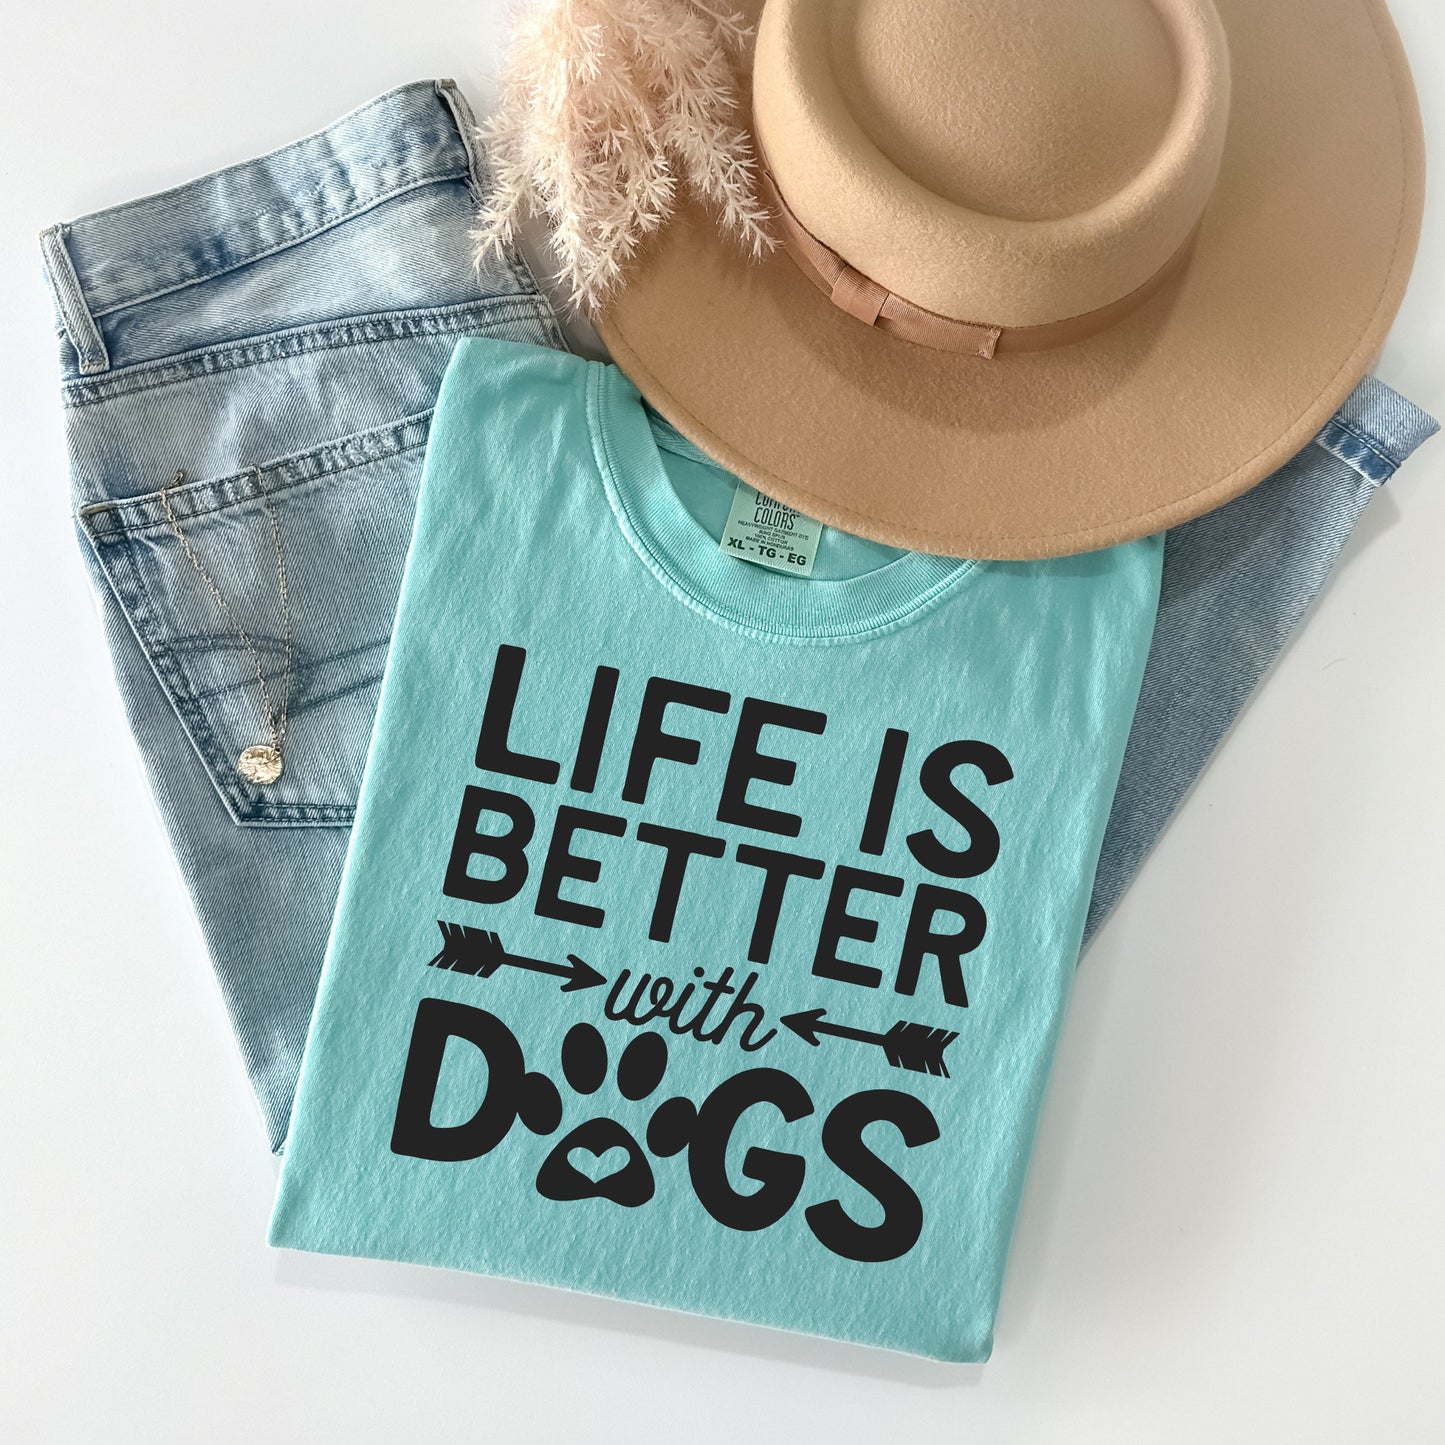 Life is Better with Dogs - Comfort Colors Graphic Tee